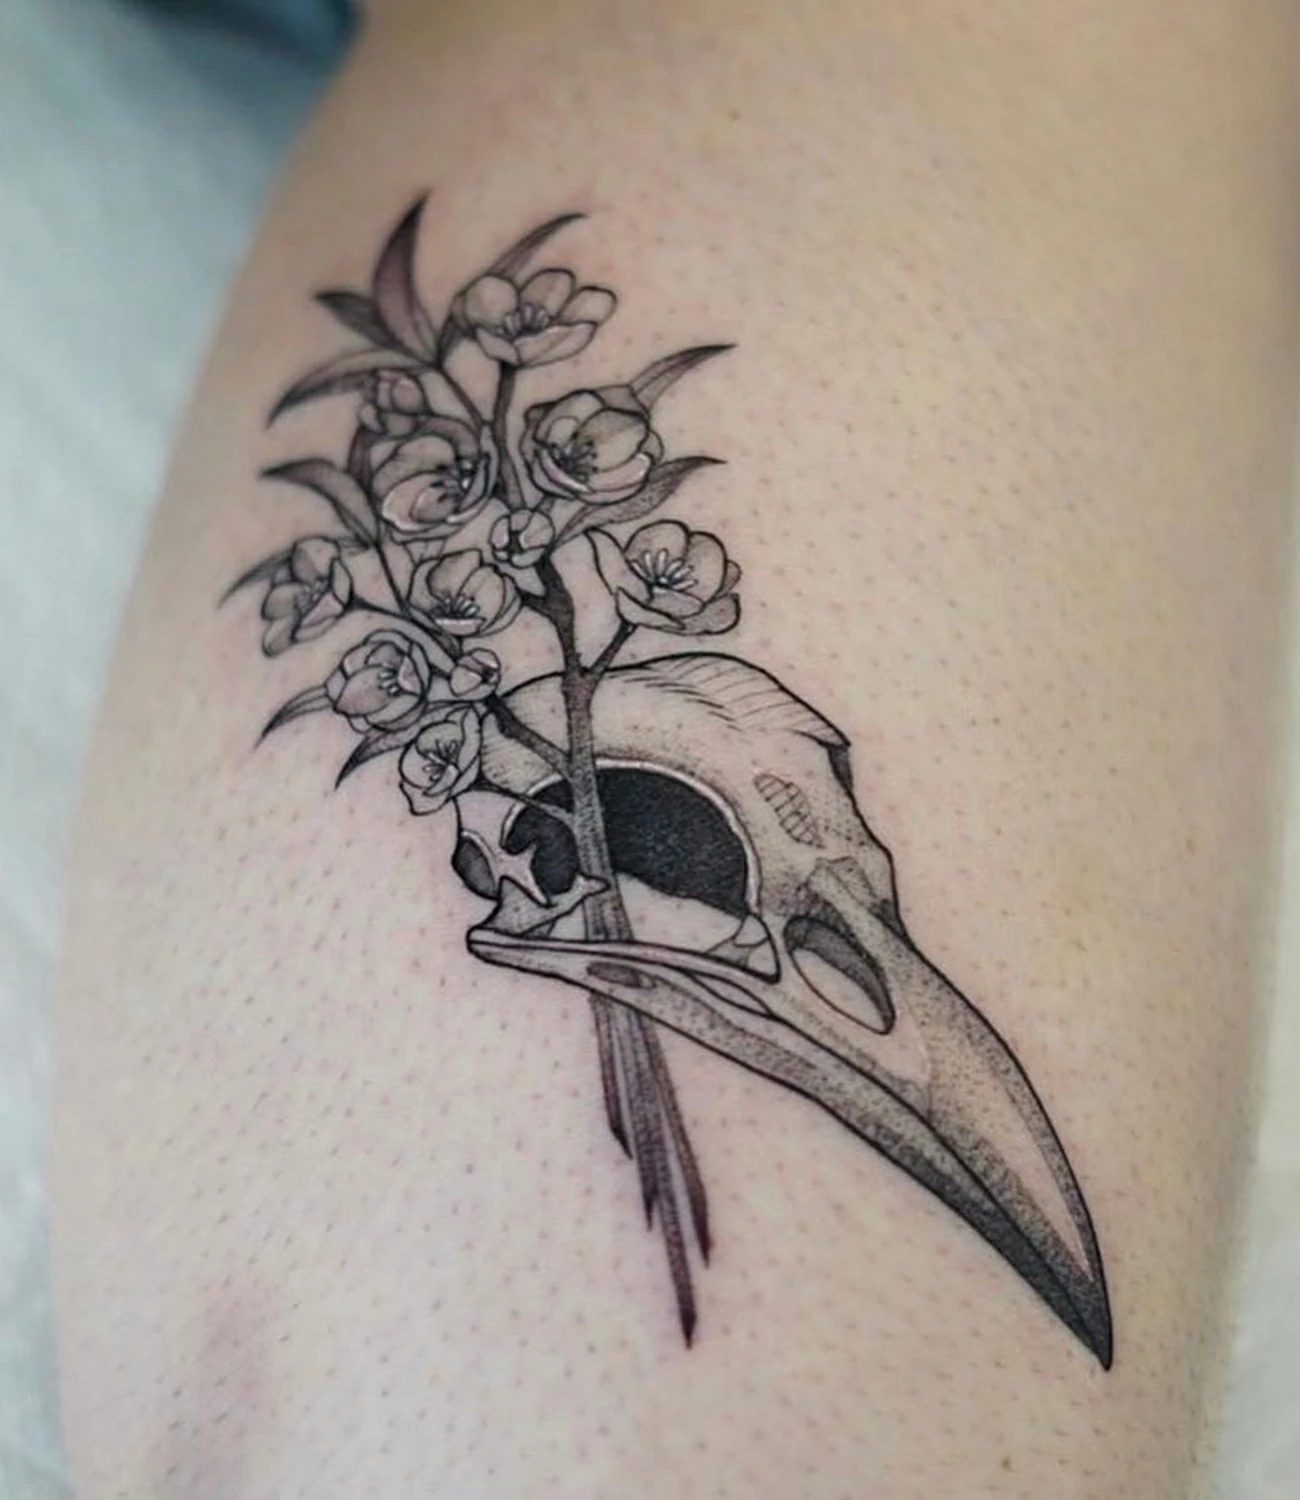 Raven skull tattoo: A striking tattoo combining a raven and a skull for a dramatic effect.